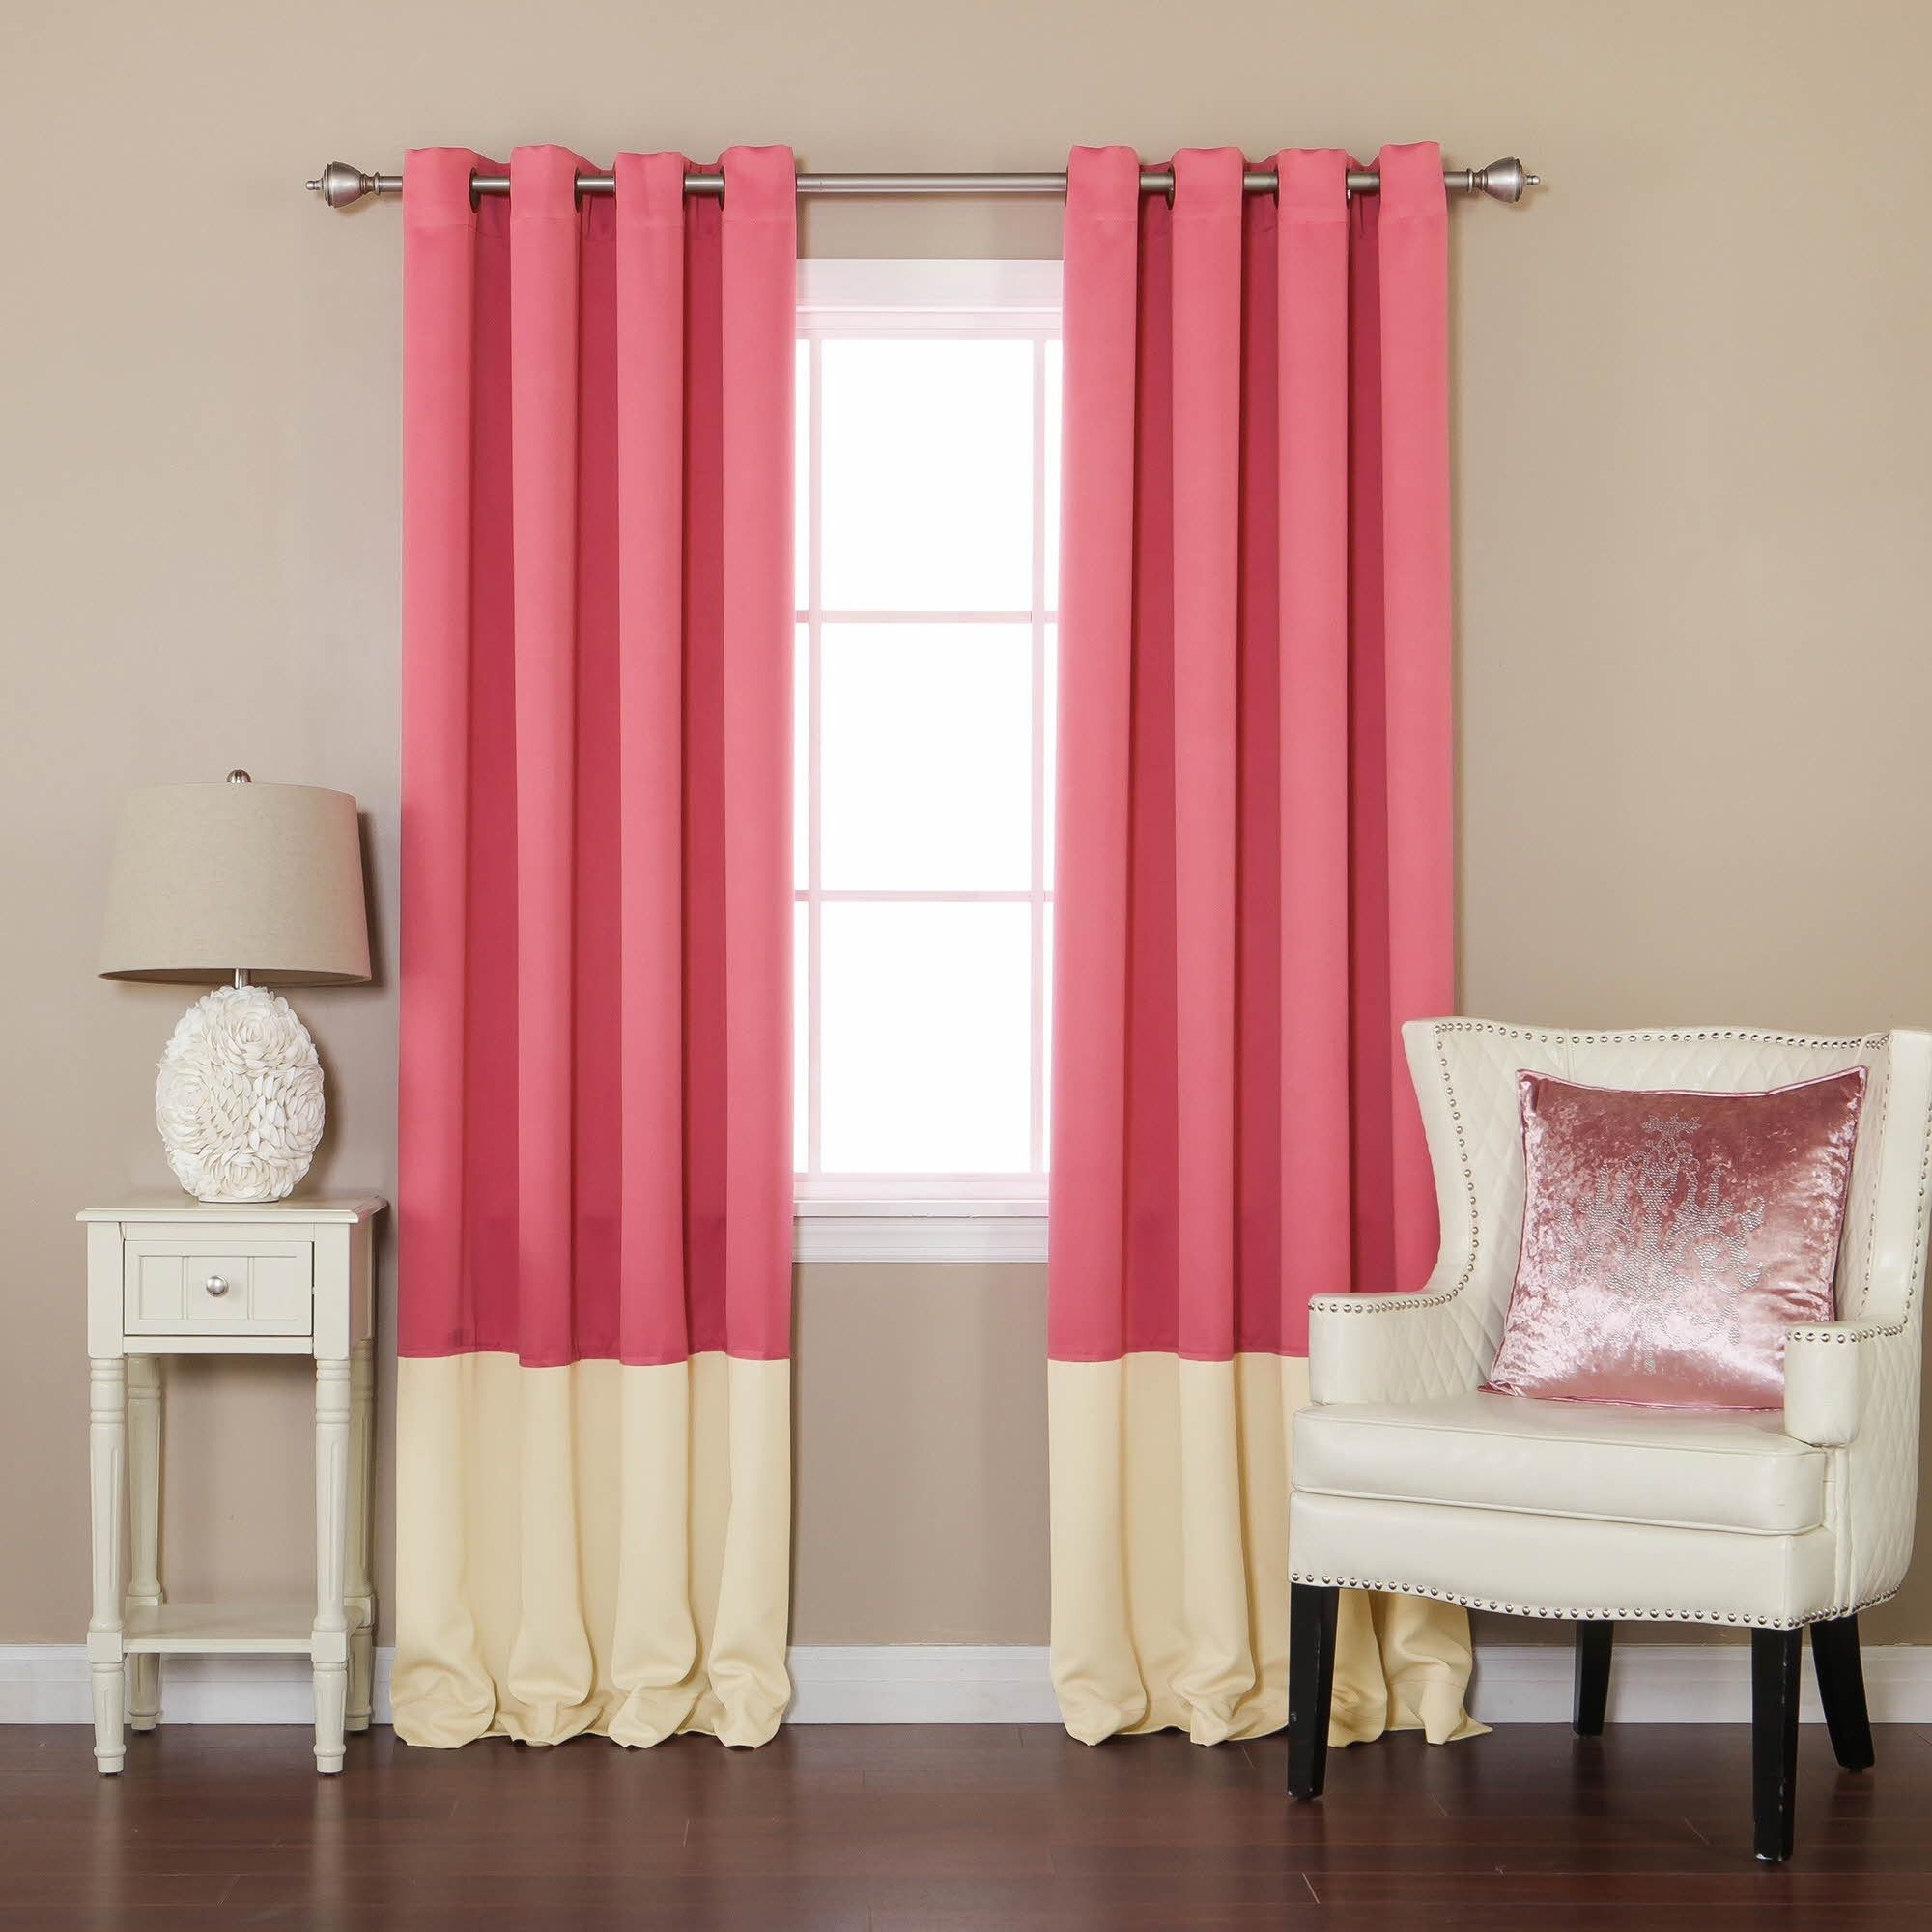 Thermal Bedroom Curtains | Curtain Ideas